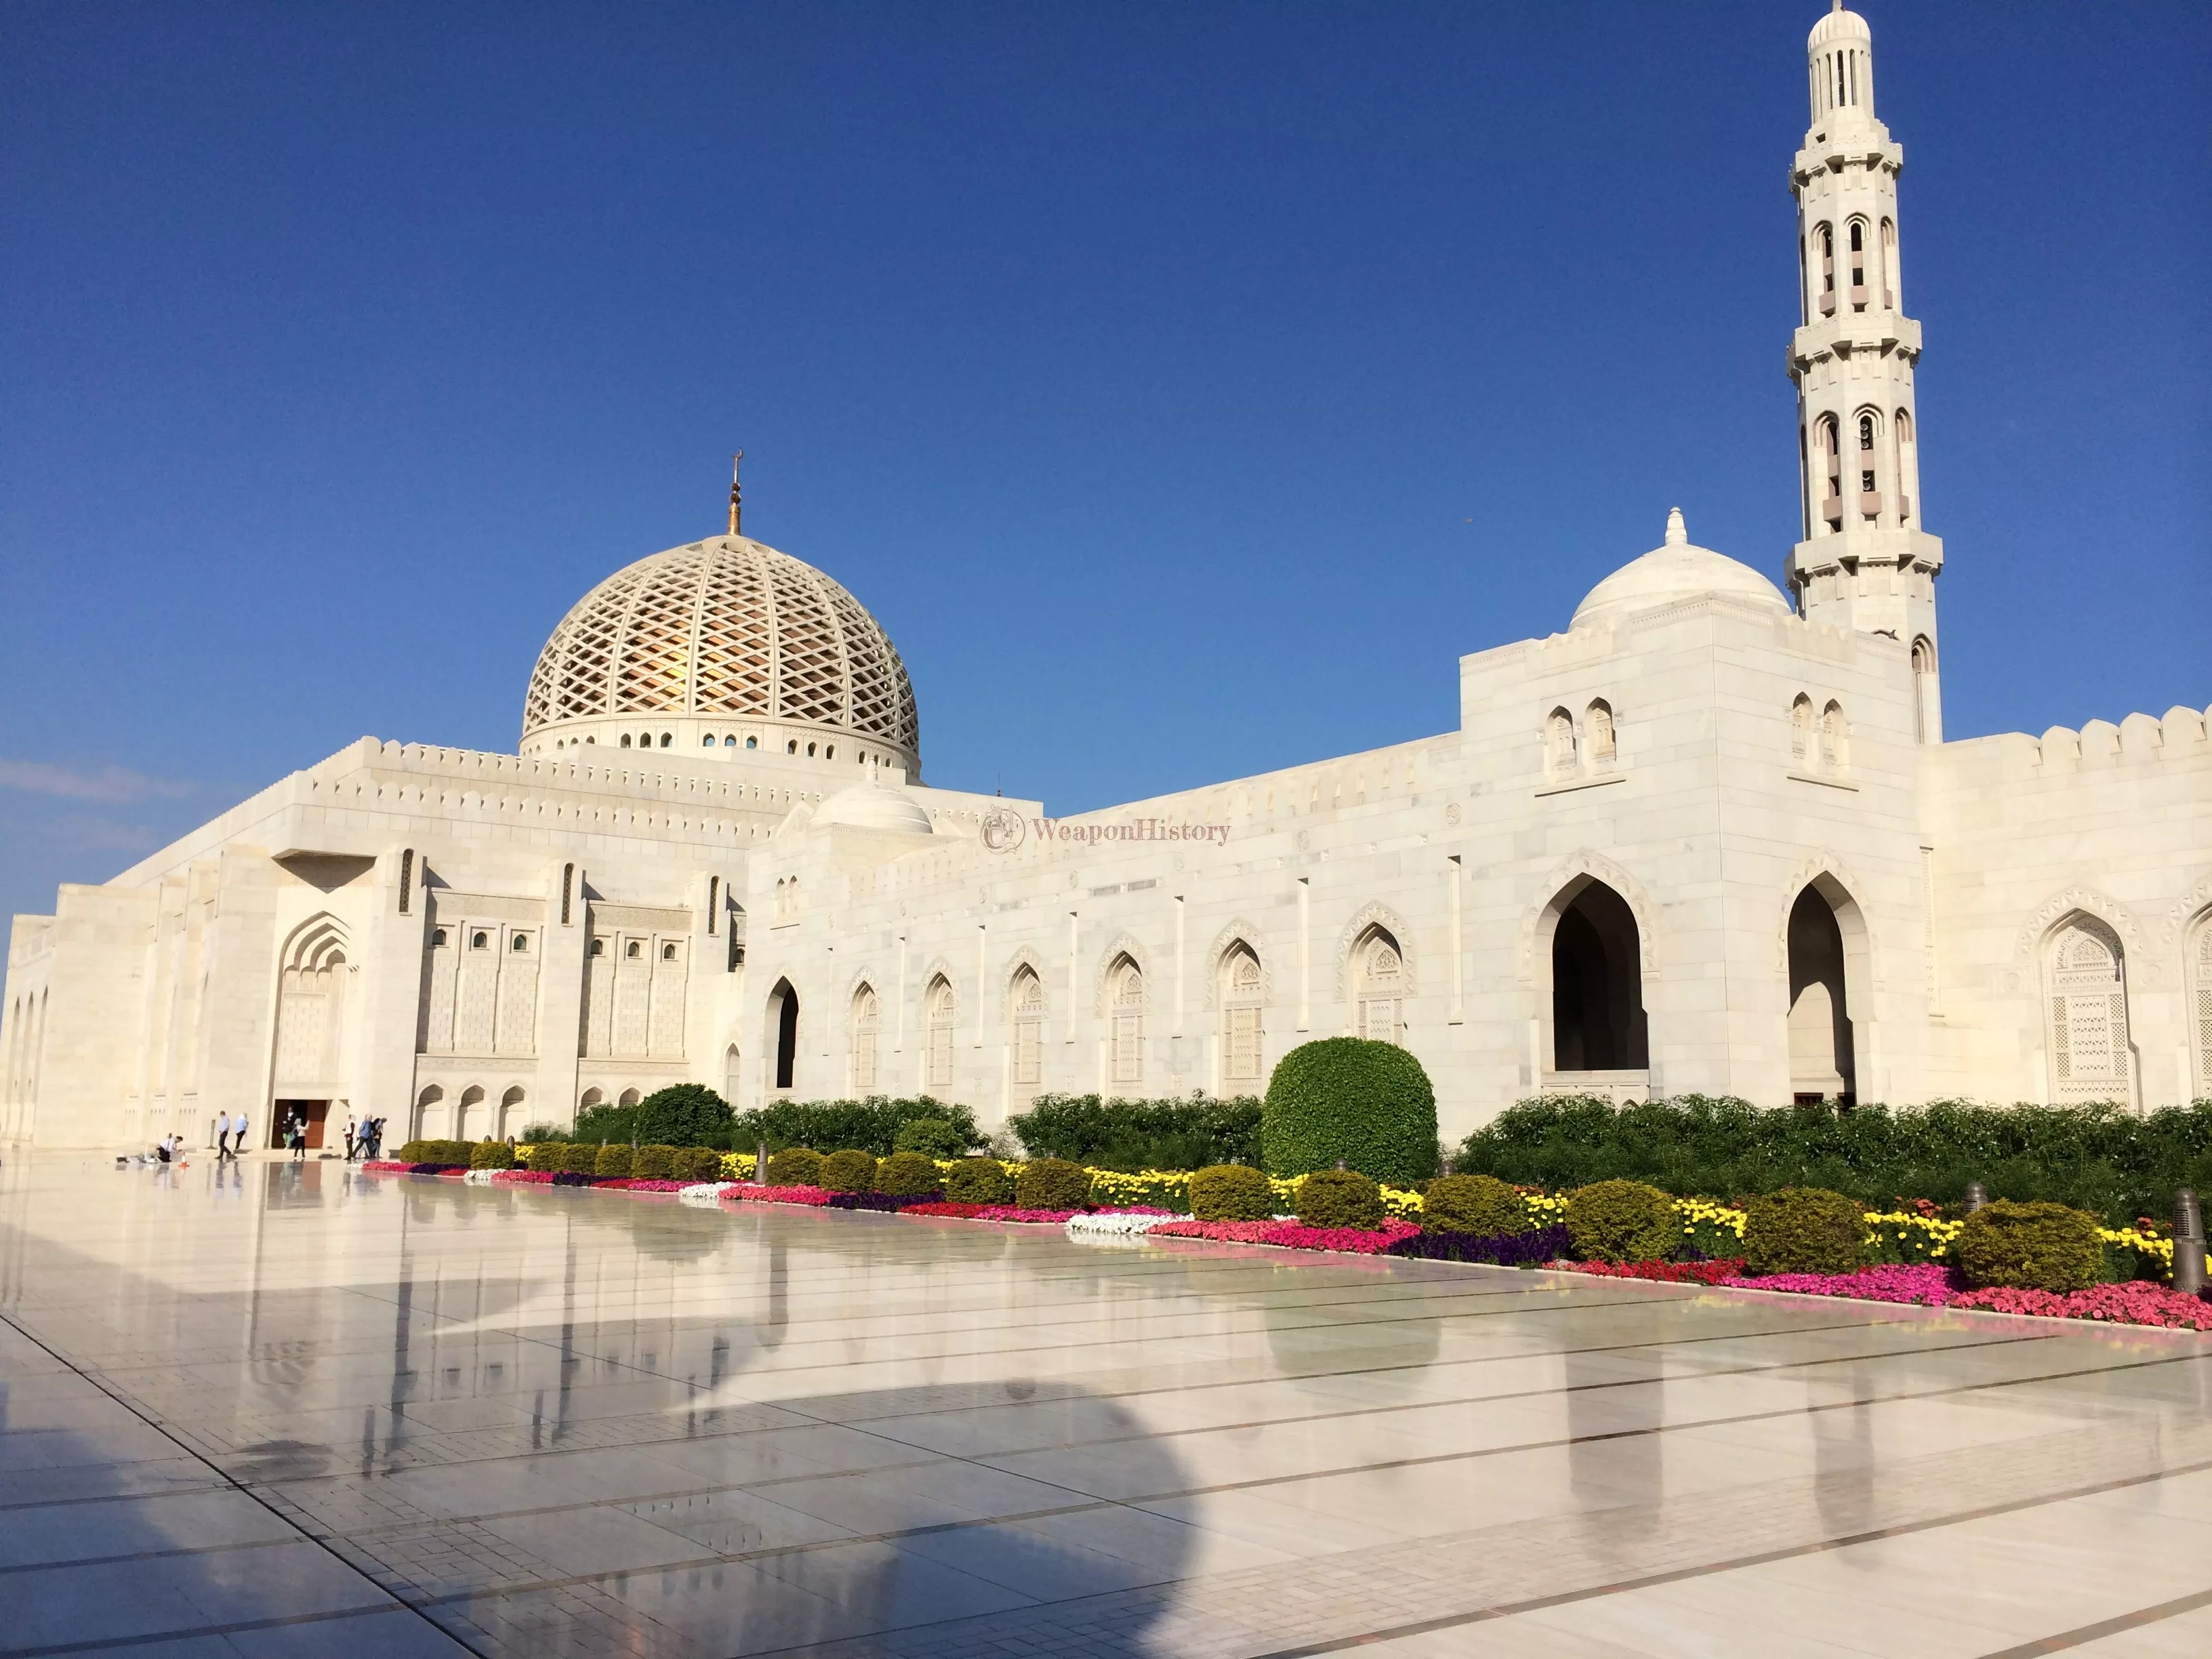 Sultan Qaboos Mosque in Oman, Middle East | Architecture - Rated 4